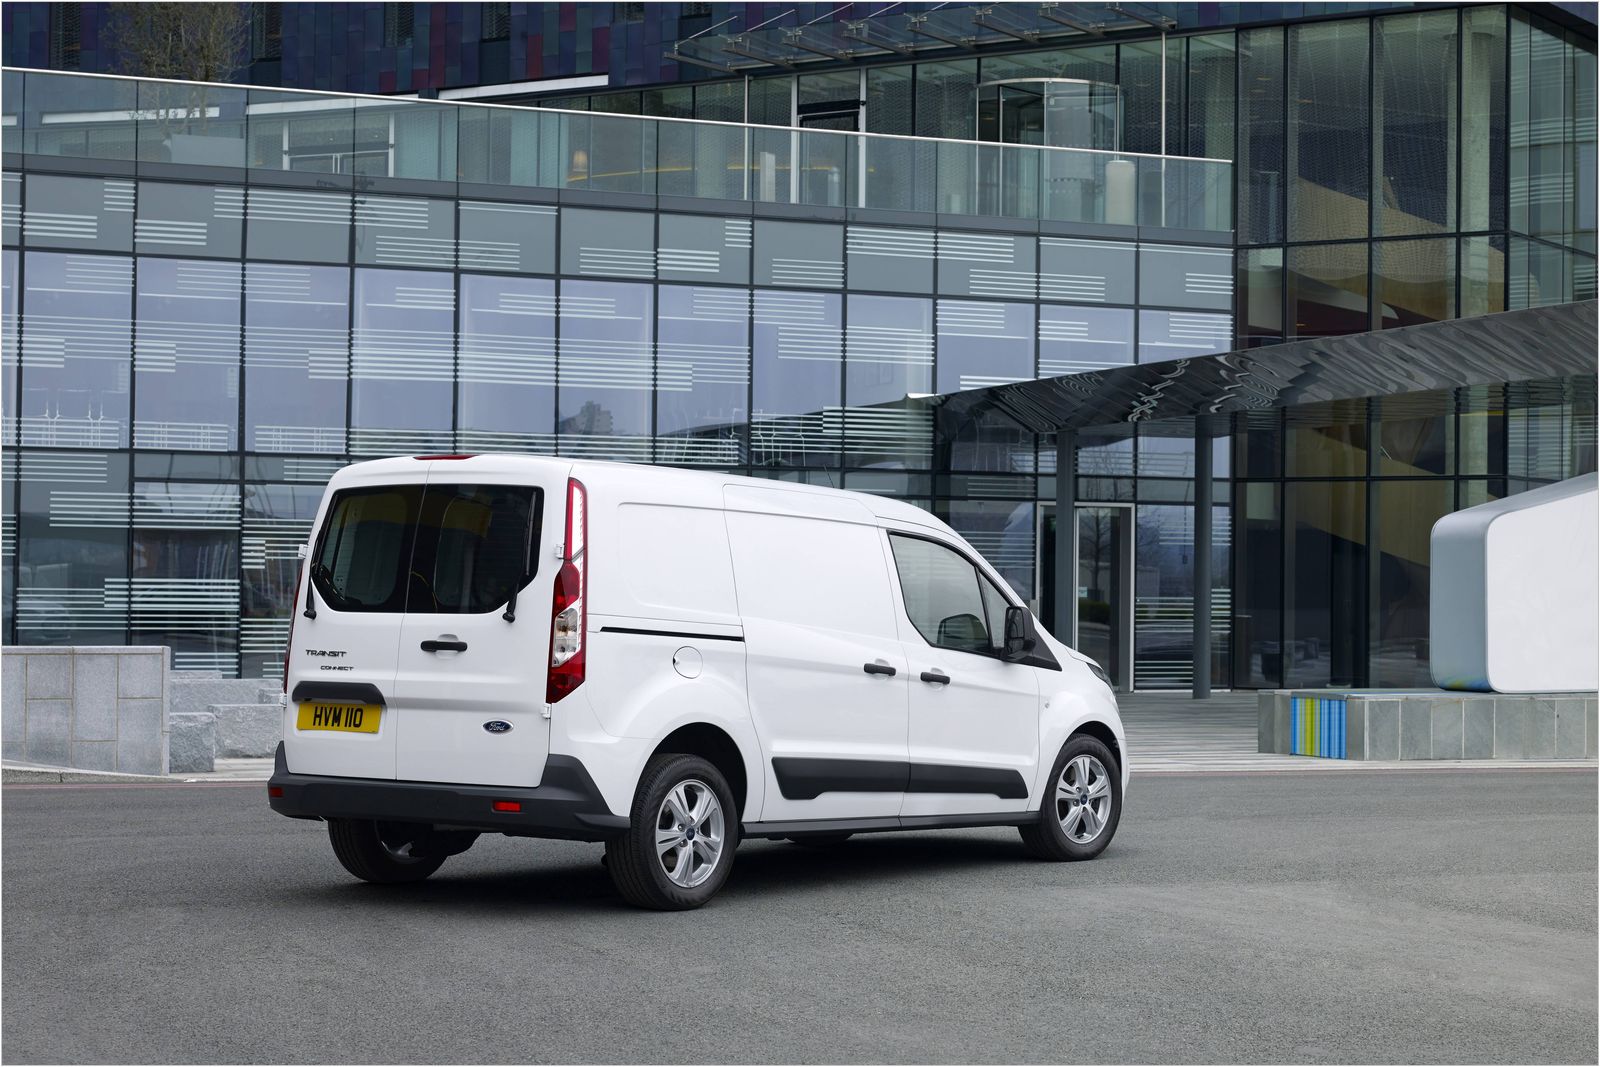 Ford Transit Connect, 1600x1067px, img-4